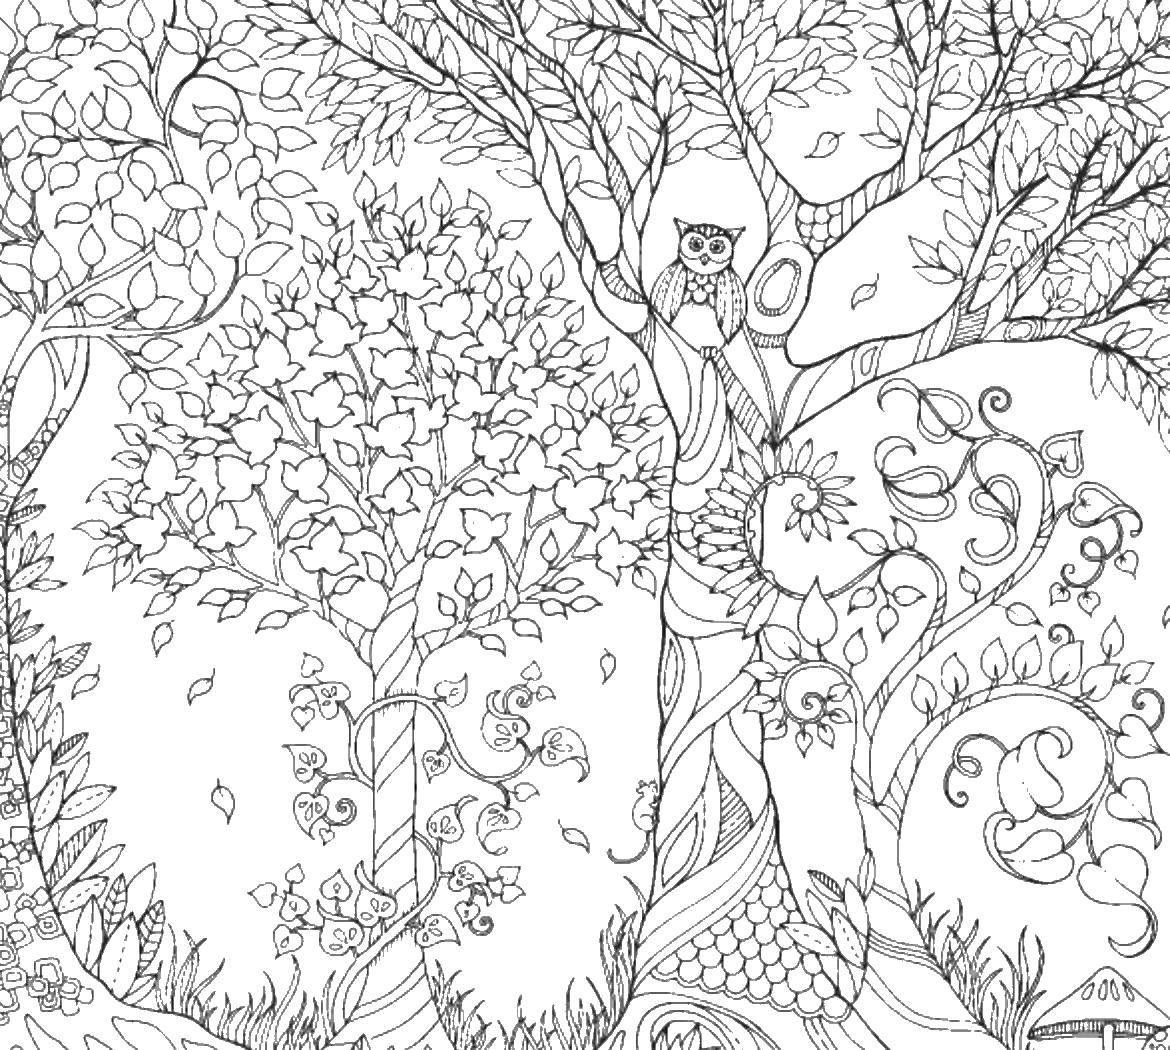 Coloring Owl in the woods. Category the forest. Tags:  forest, owl.